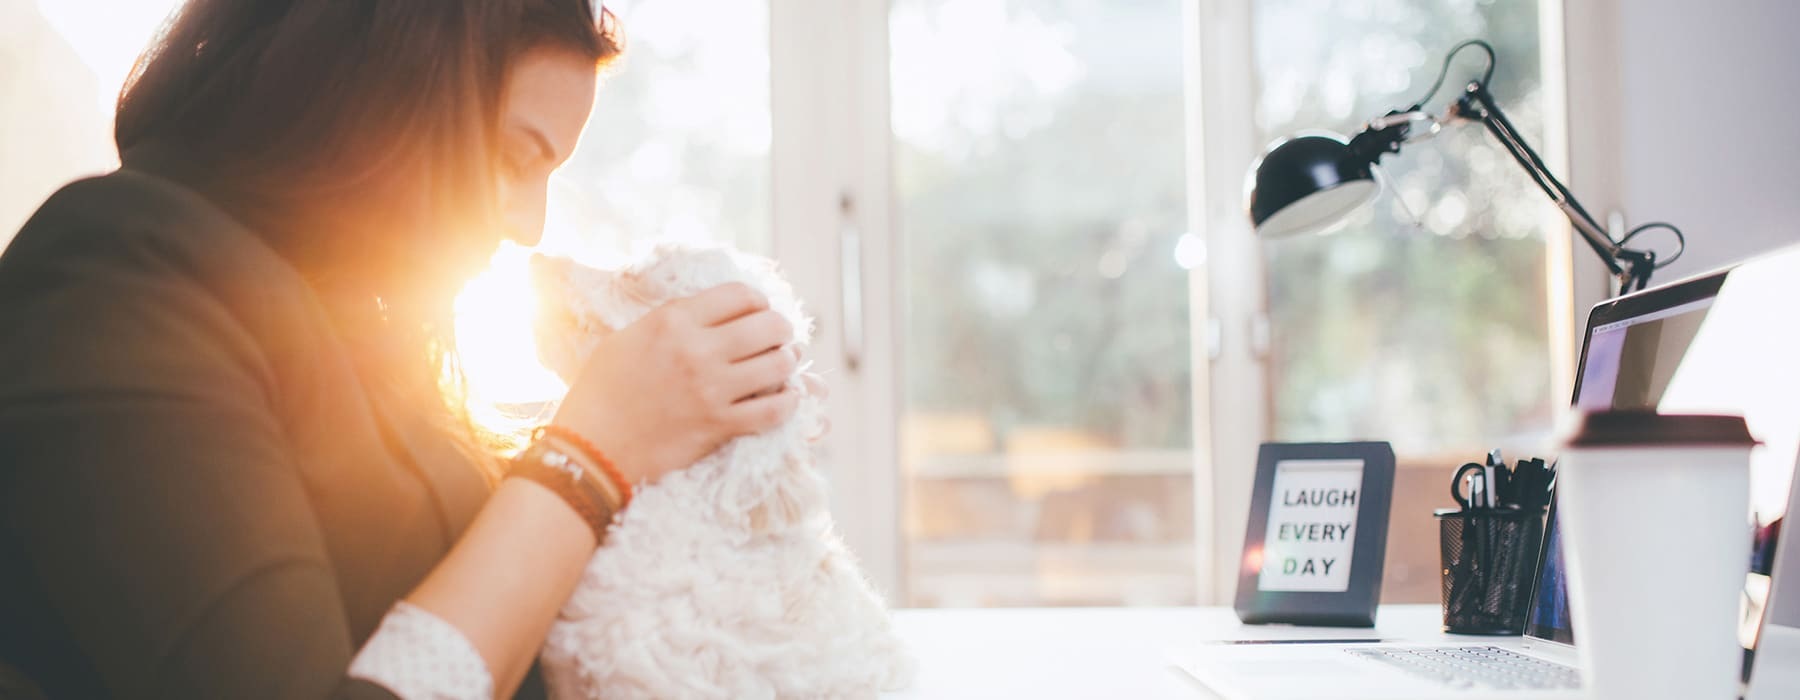 lifestyle image of a young professional woman holding her pet beside sun-rays coming through a large window